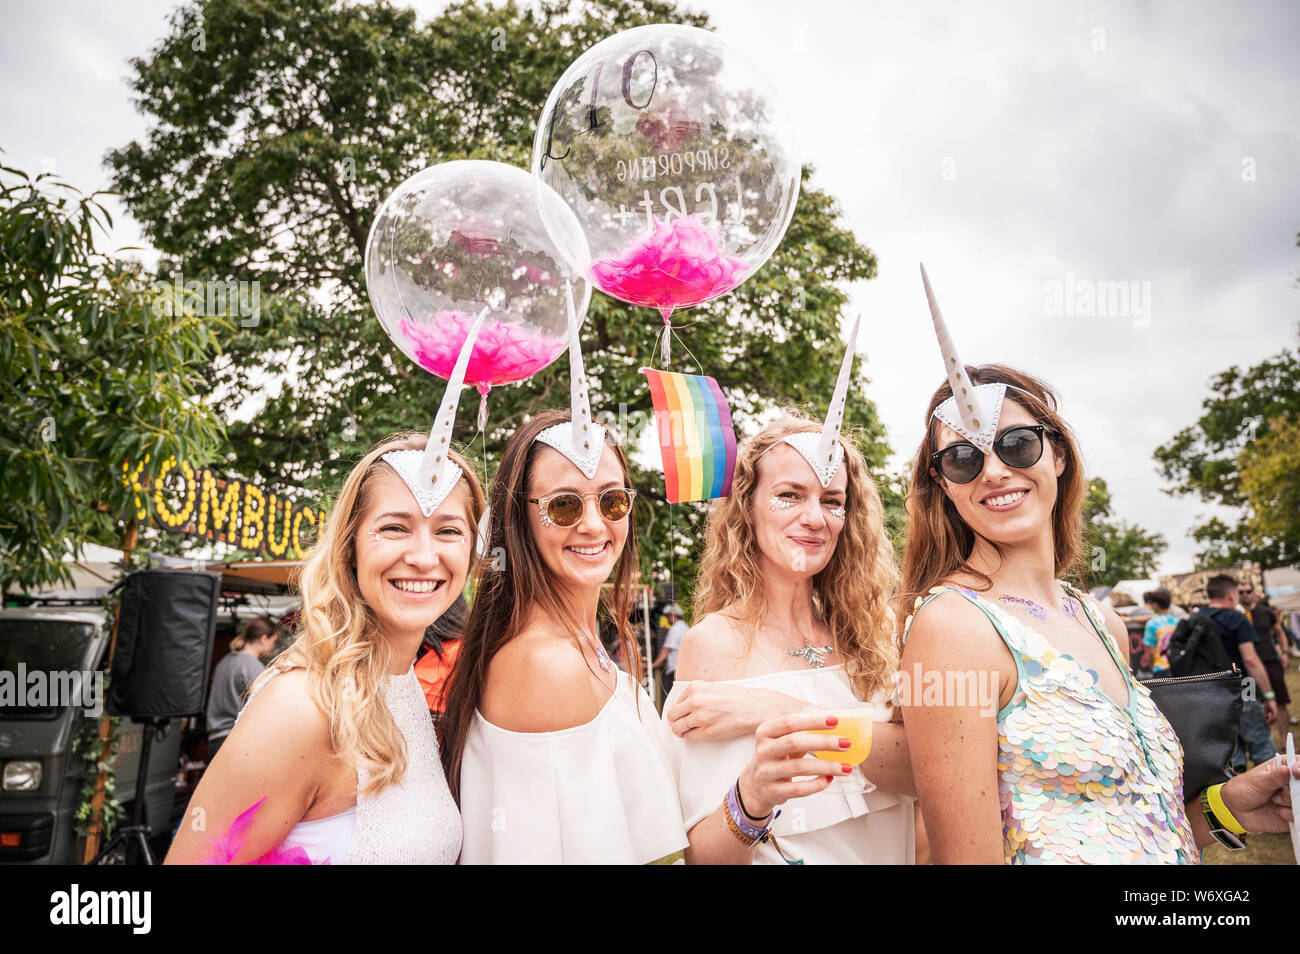 Cornbury Park, Oxfordshire, UK. Saturday 3rd August 2019. Wilderness Festival, Oxfordshire, UK.  Revellers dressed up as Wilderness gets into full swing. Now in its 9th year, the festival is a celebration of art, music, fashion and culture on Cornbury Estate near Chipping Norton. Picture: Andrew Walmsley/Alamy Live News Stock Photo